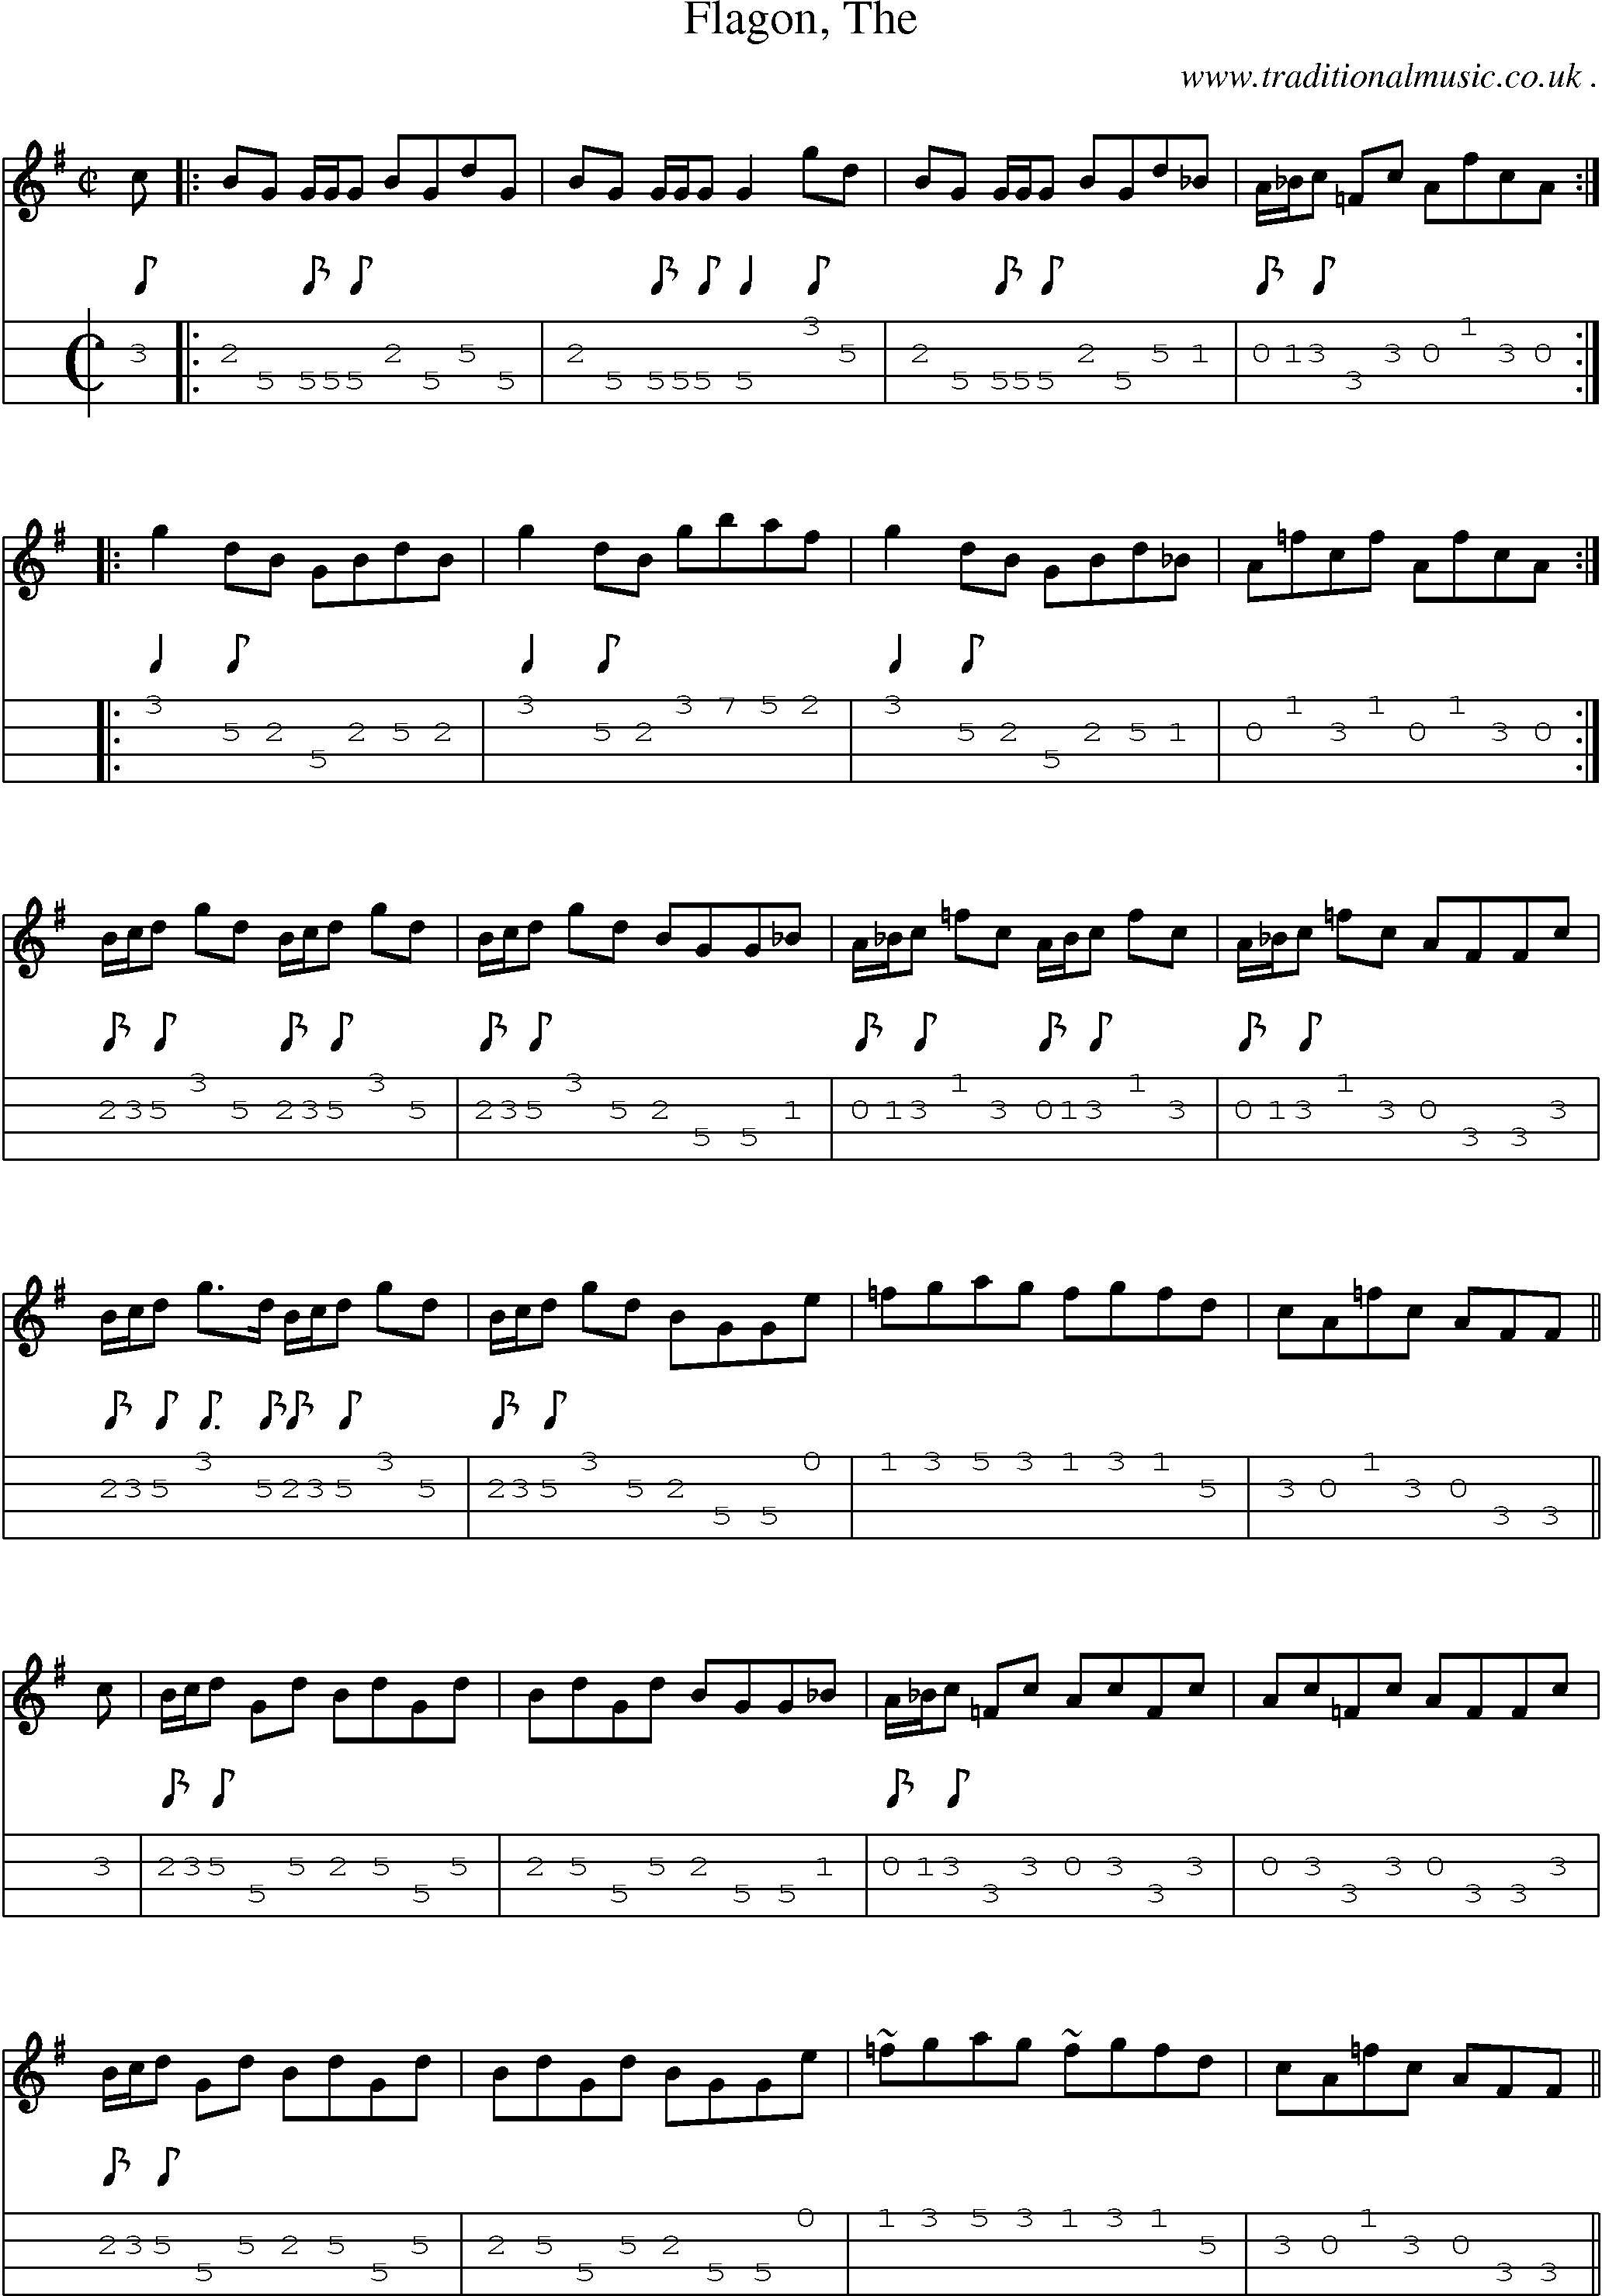 Sheet-music  score, Chords and Mandolin Tabs for Flagon The